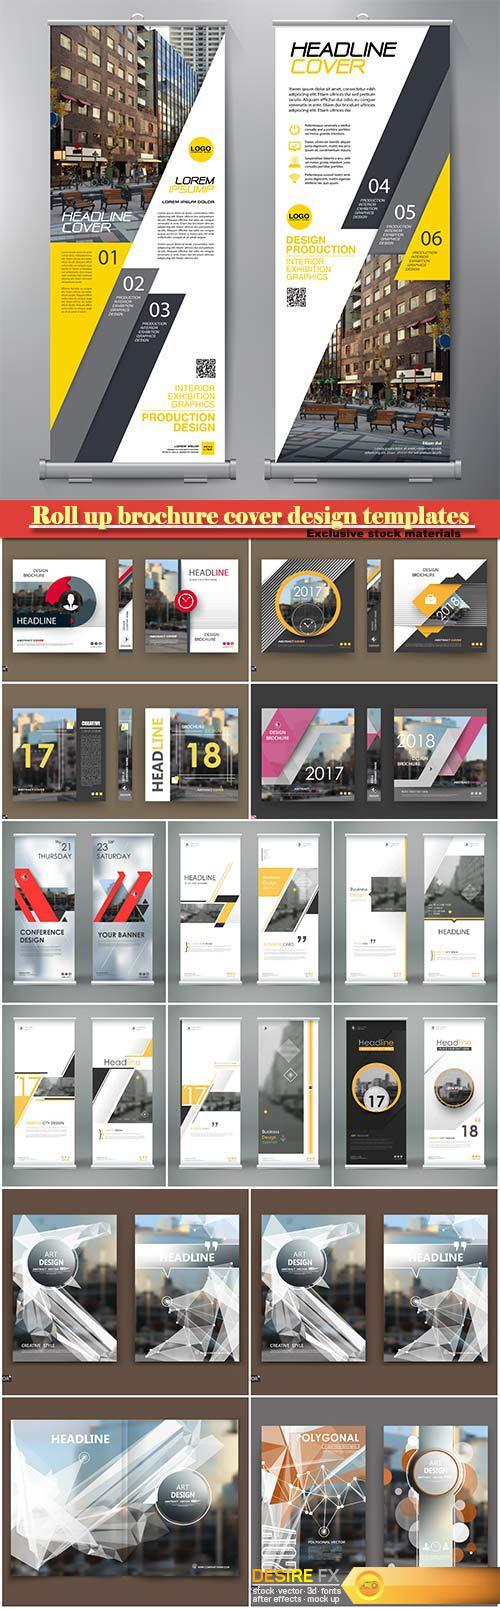 Roll up brochure cover design templates